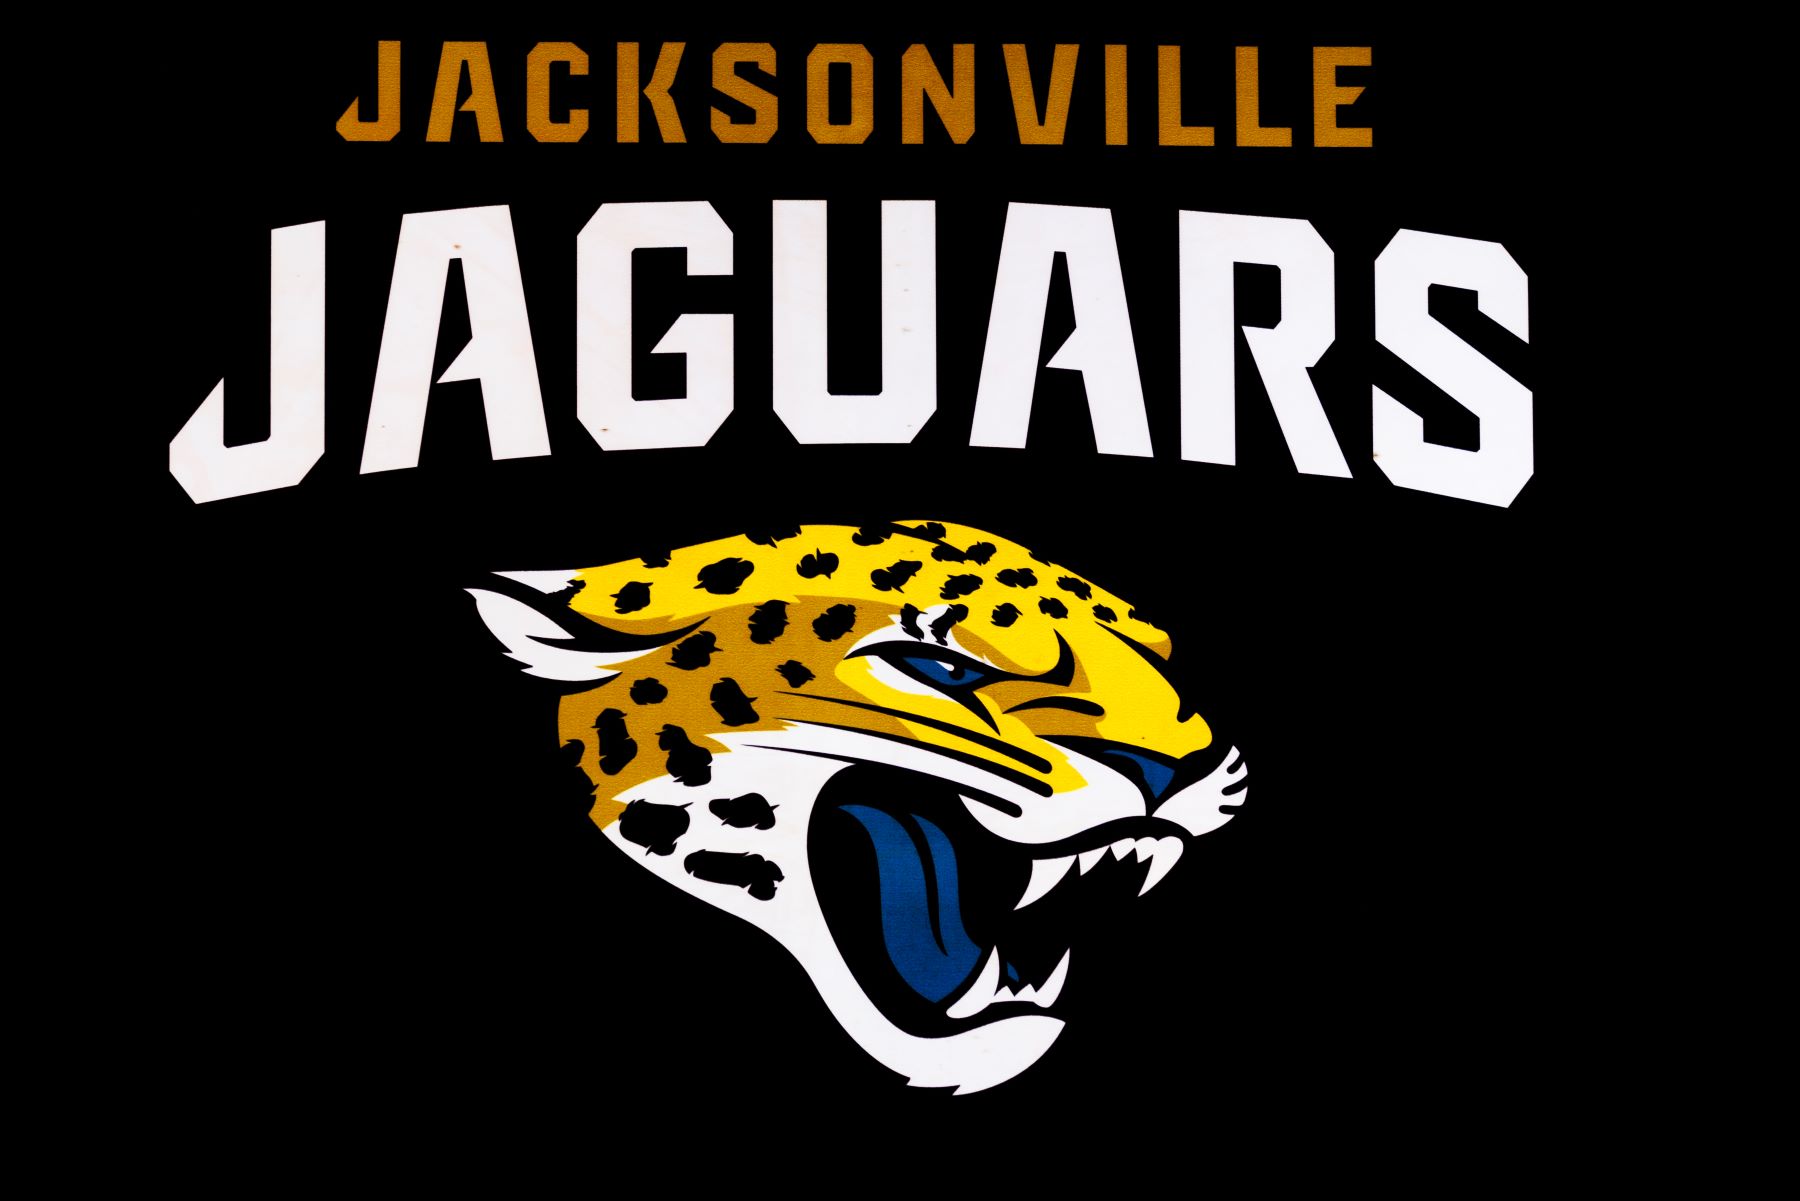 NFL team Jacksonville Jaguars logo seen at the Los Angeles Convention Center during the Super Bowl Experience